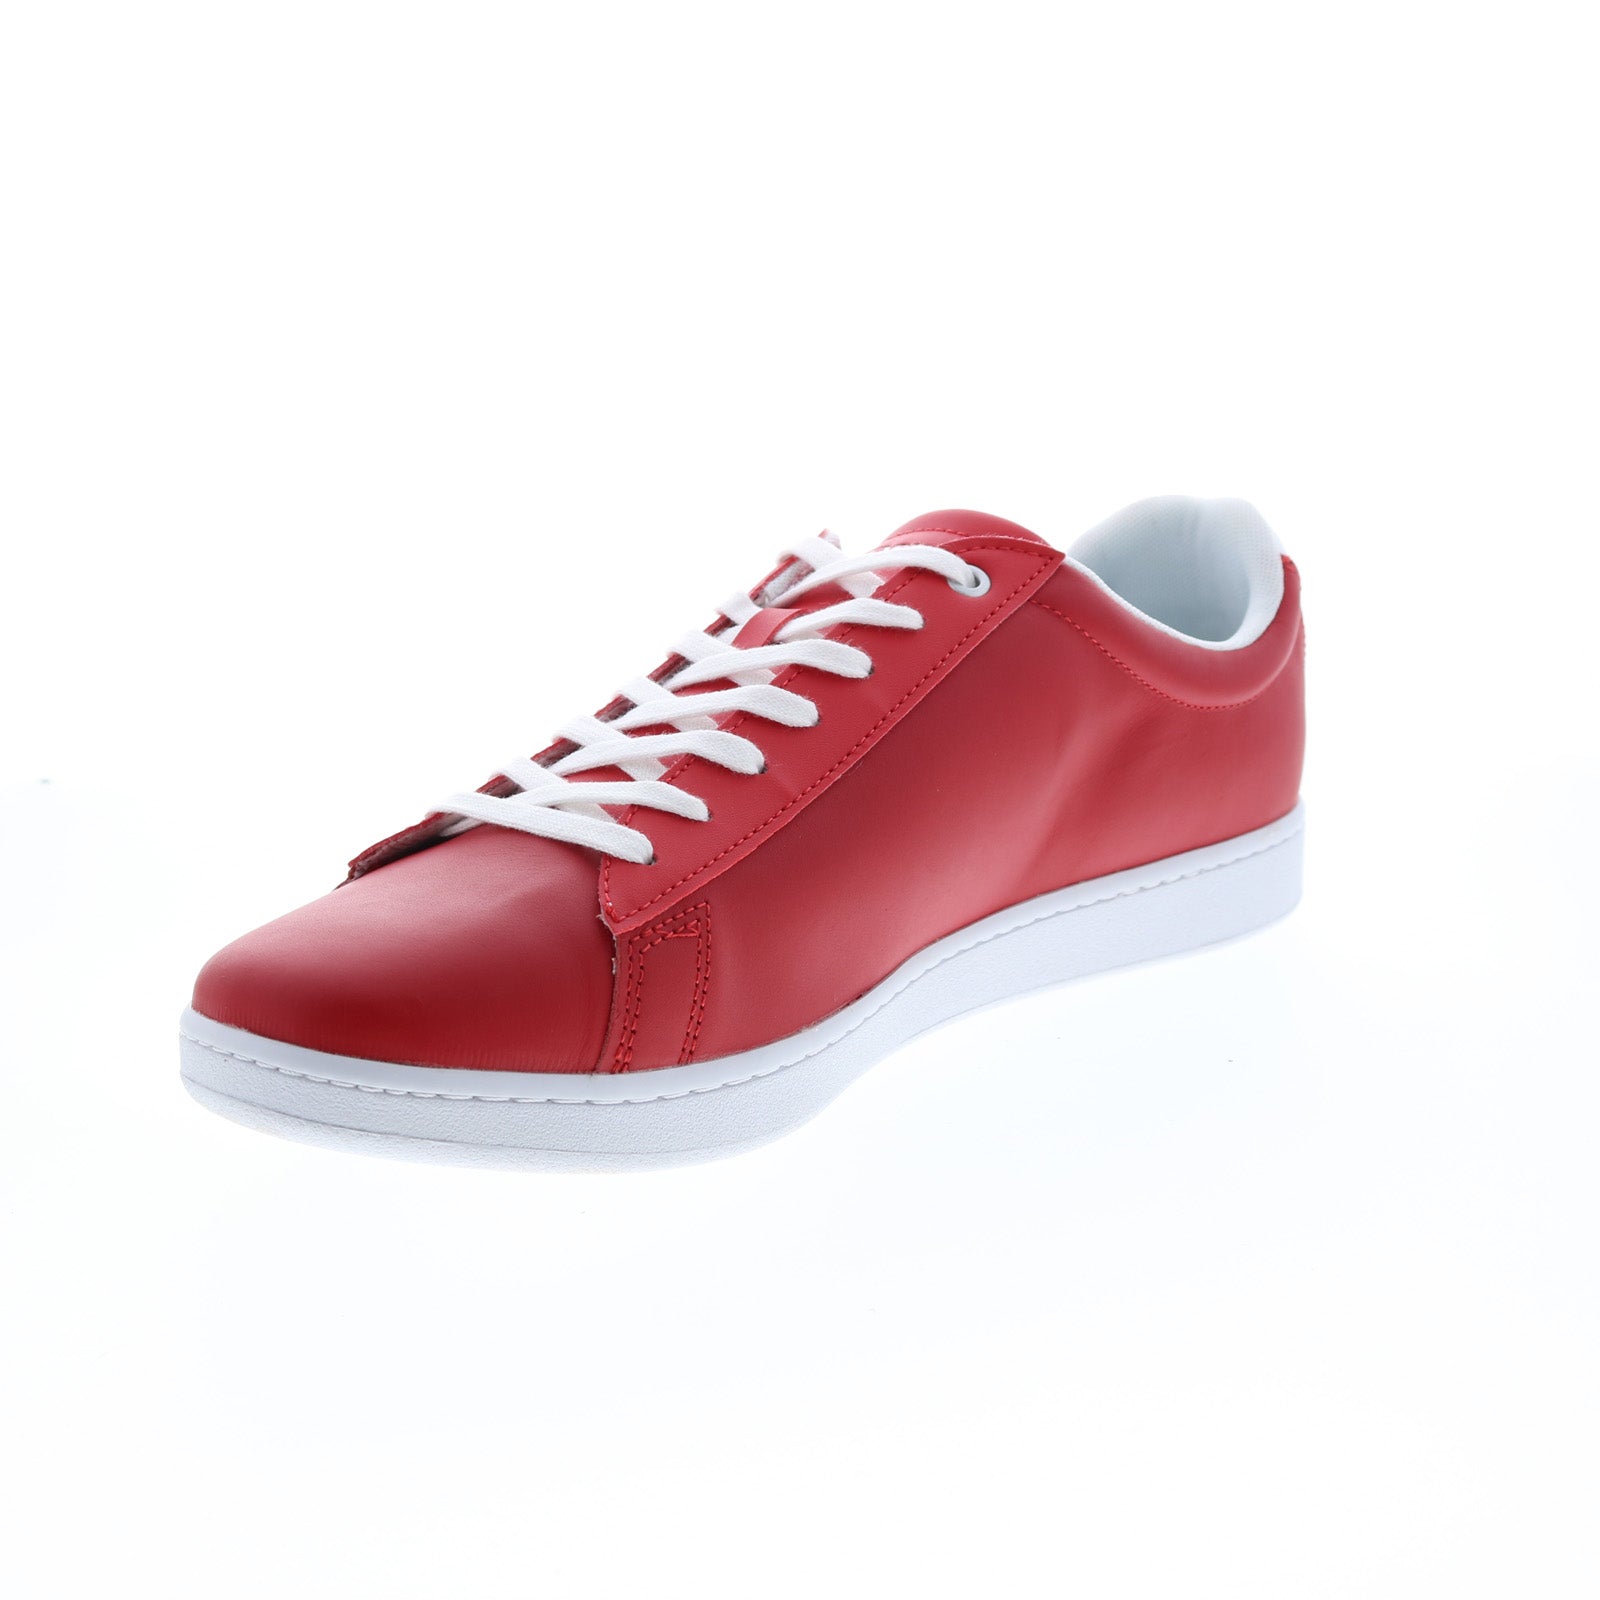 Men's Unoriginal Leather Sneaker In White x Red - Nothing New®